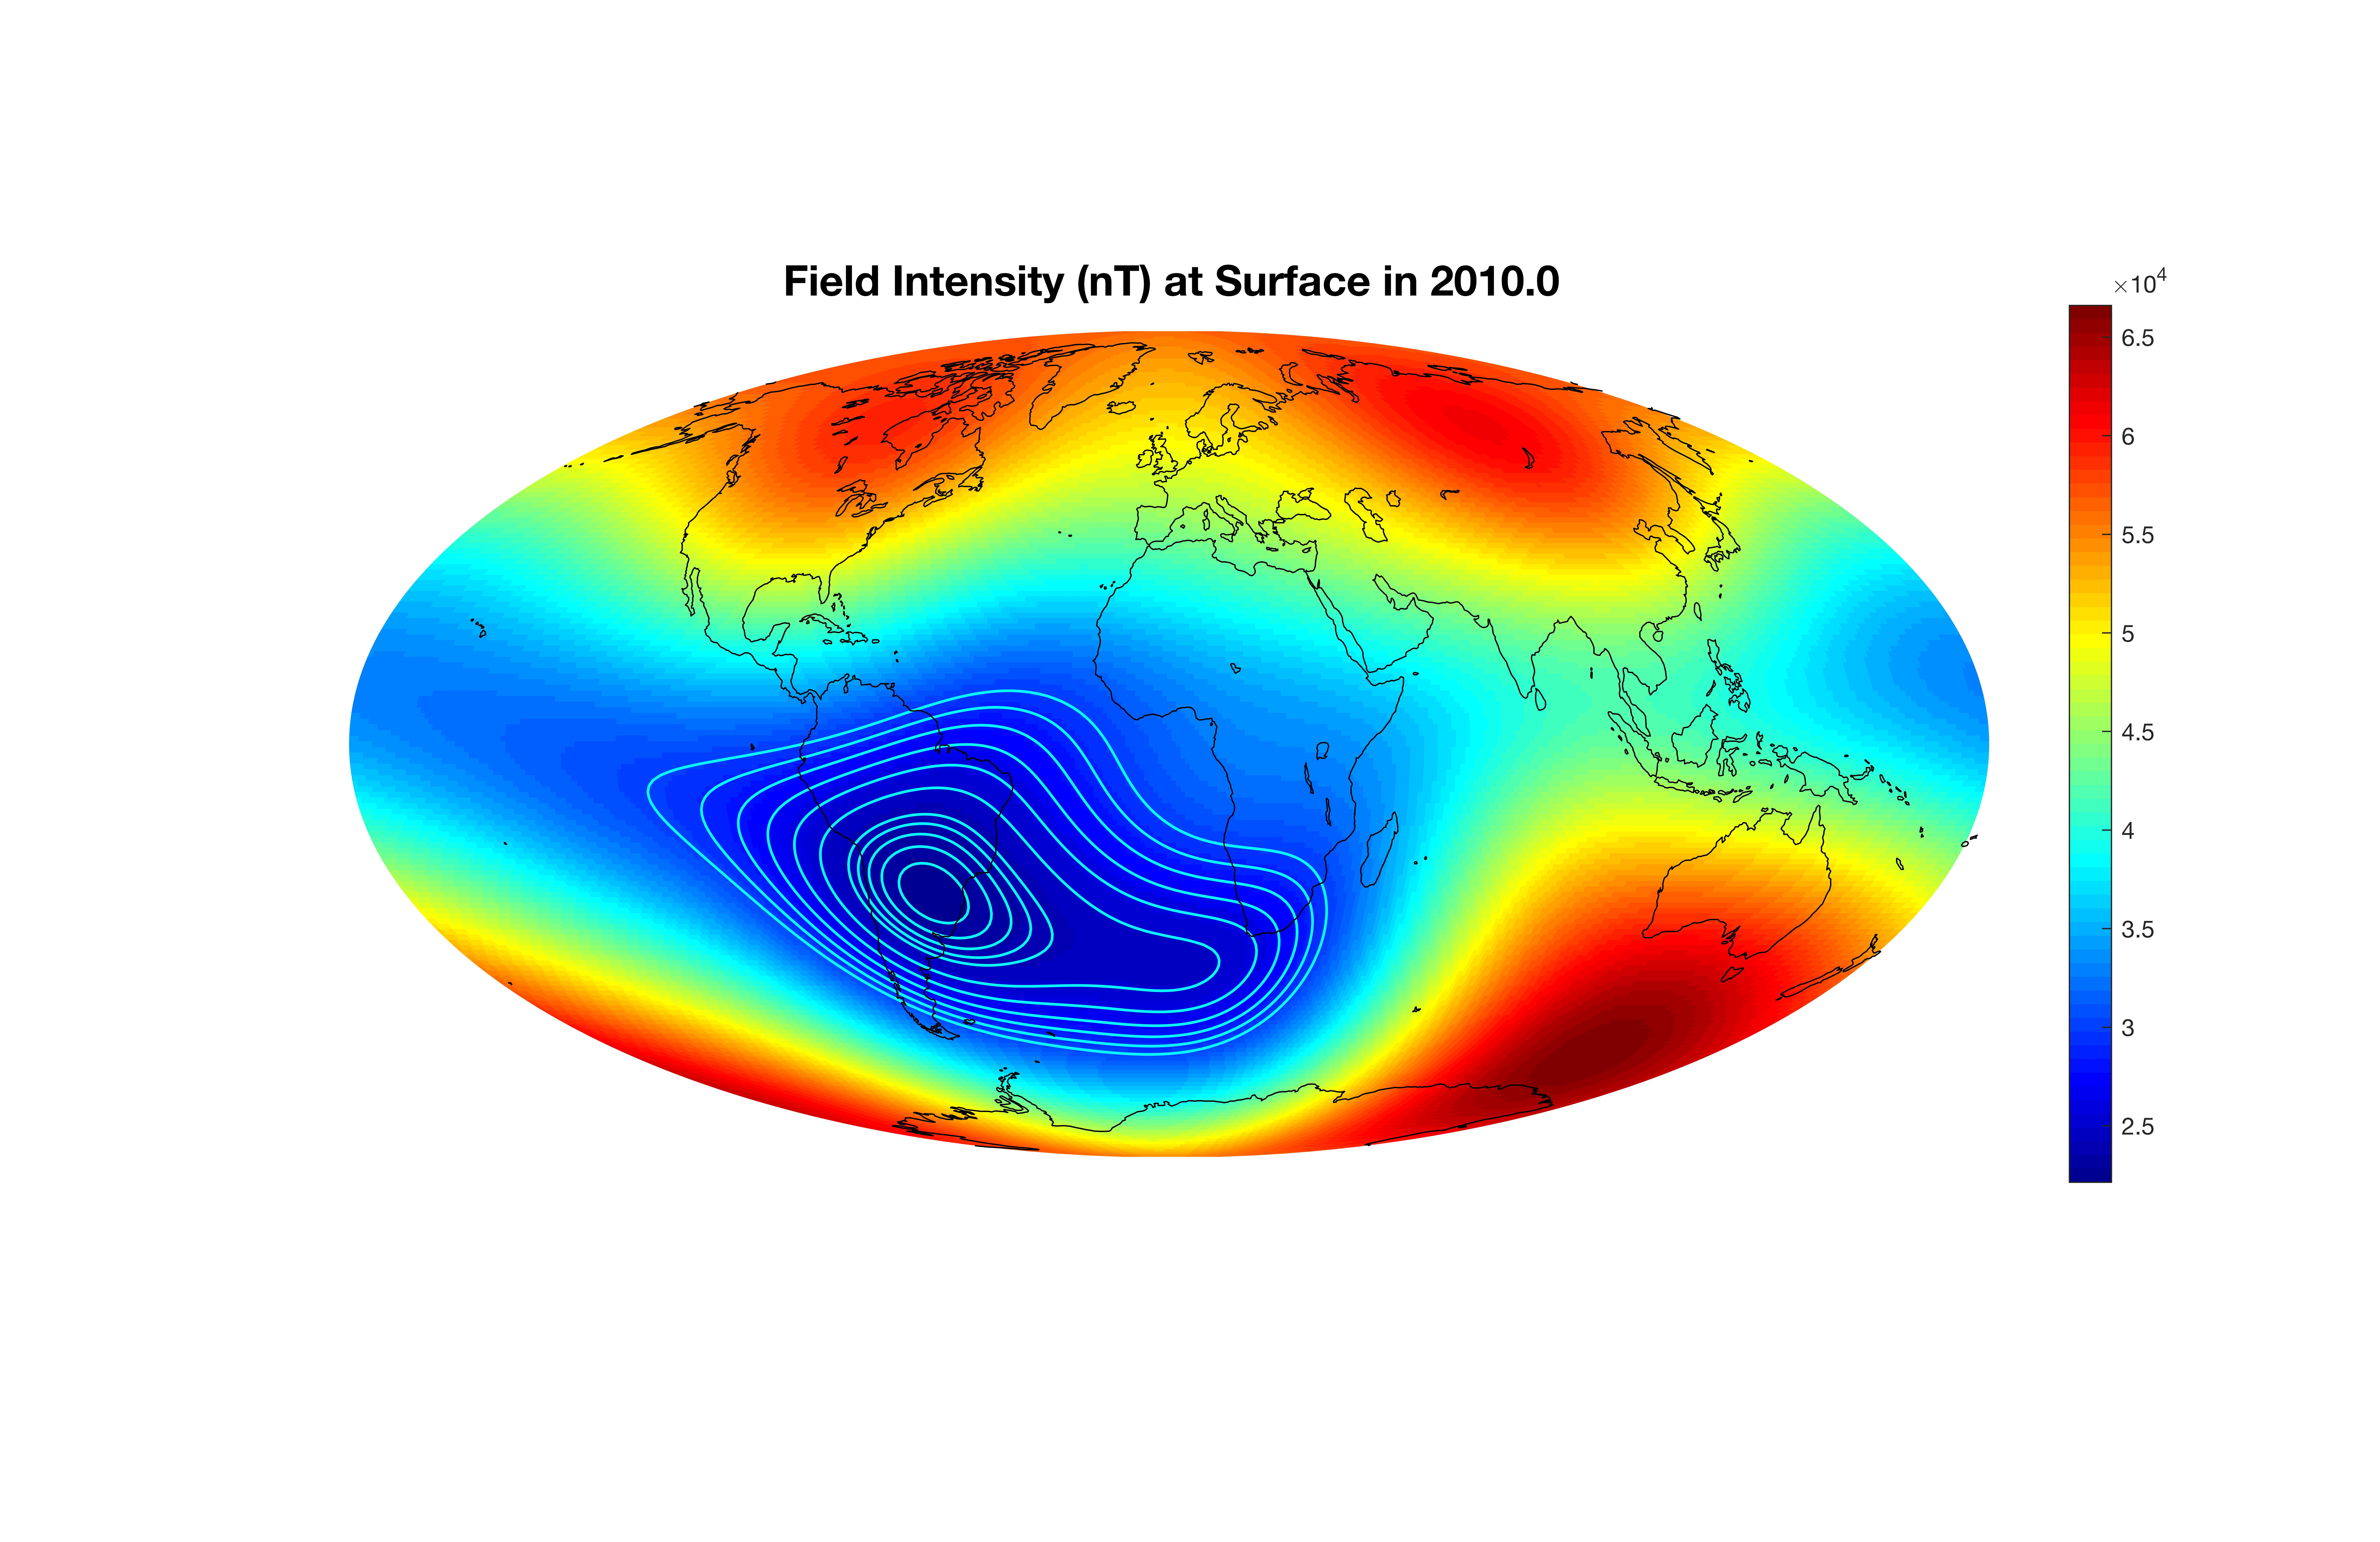 Magnetic Field Intensity on the Earth's surface in 2010 (nTesla)